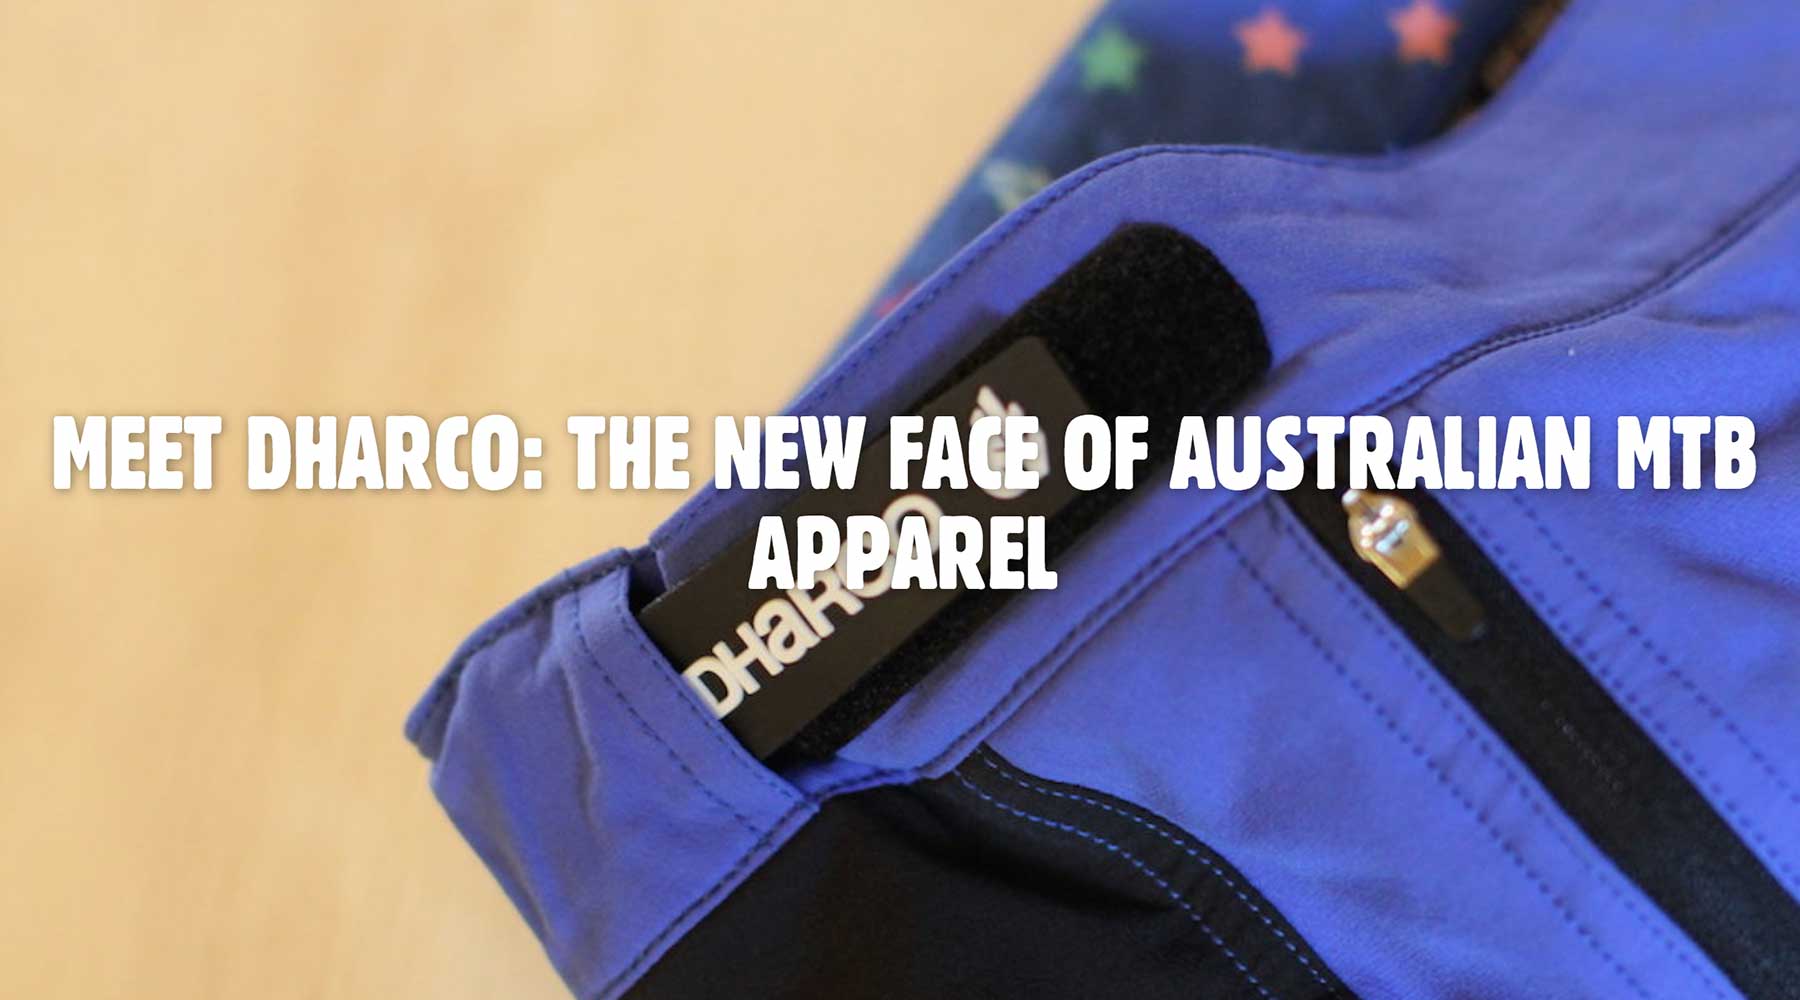 Flow Mountain Bike "The New Face of Aussie MTB Apparel"